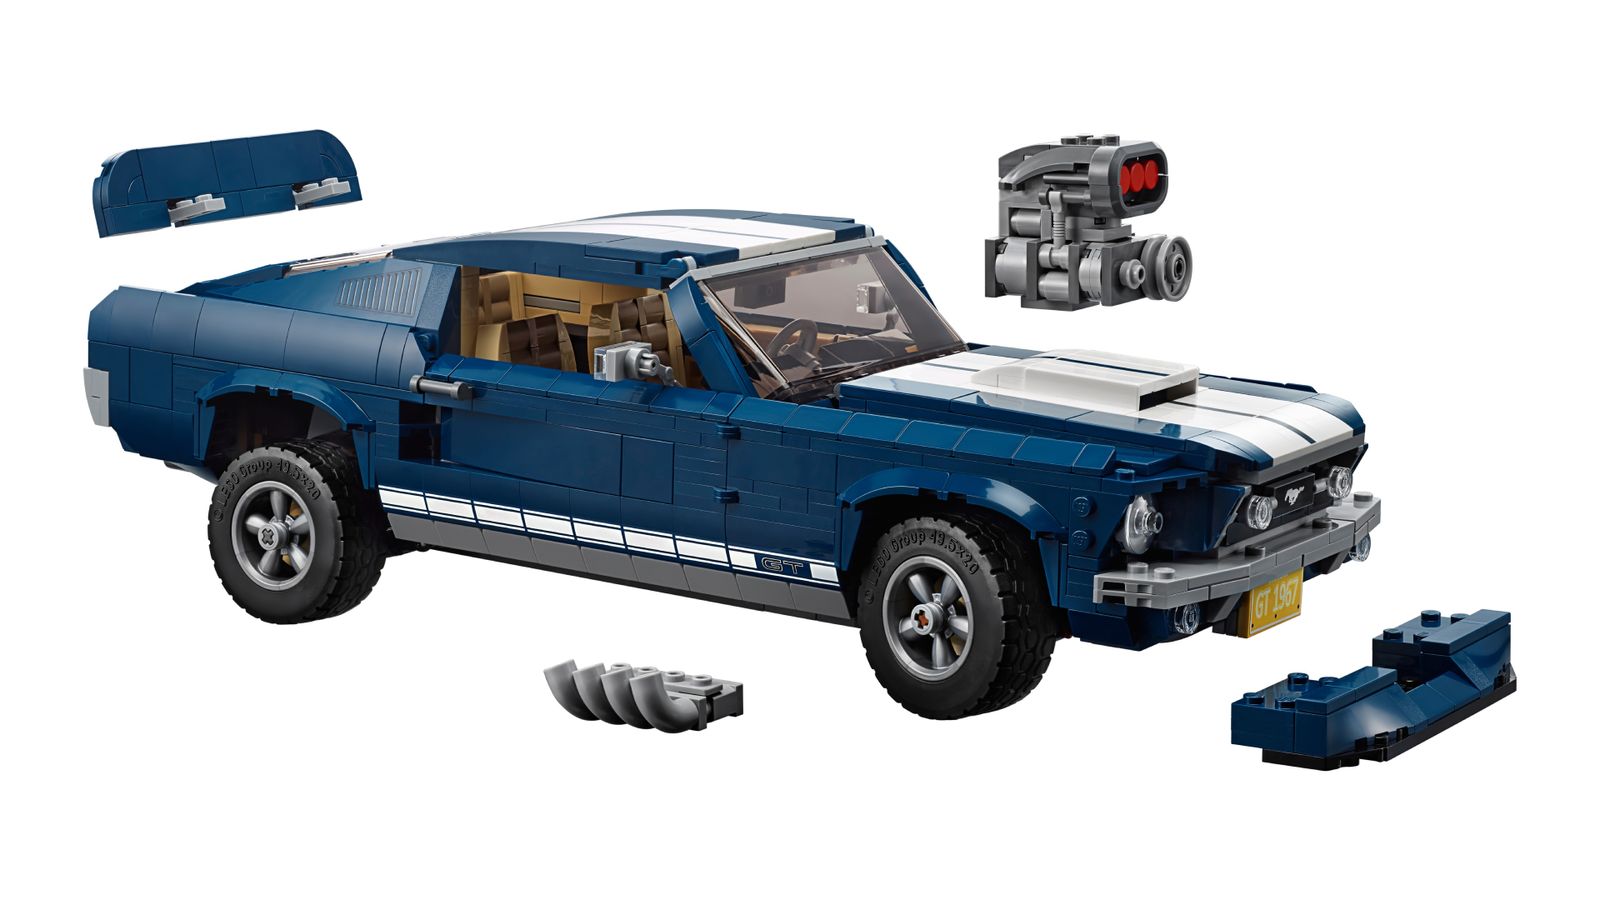 LEGO Creator 1960s Ford Mustang product image of a blue Ford Mustang with white racing stripes.